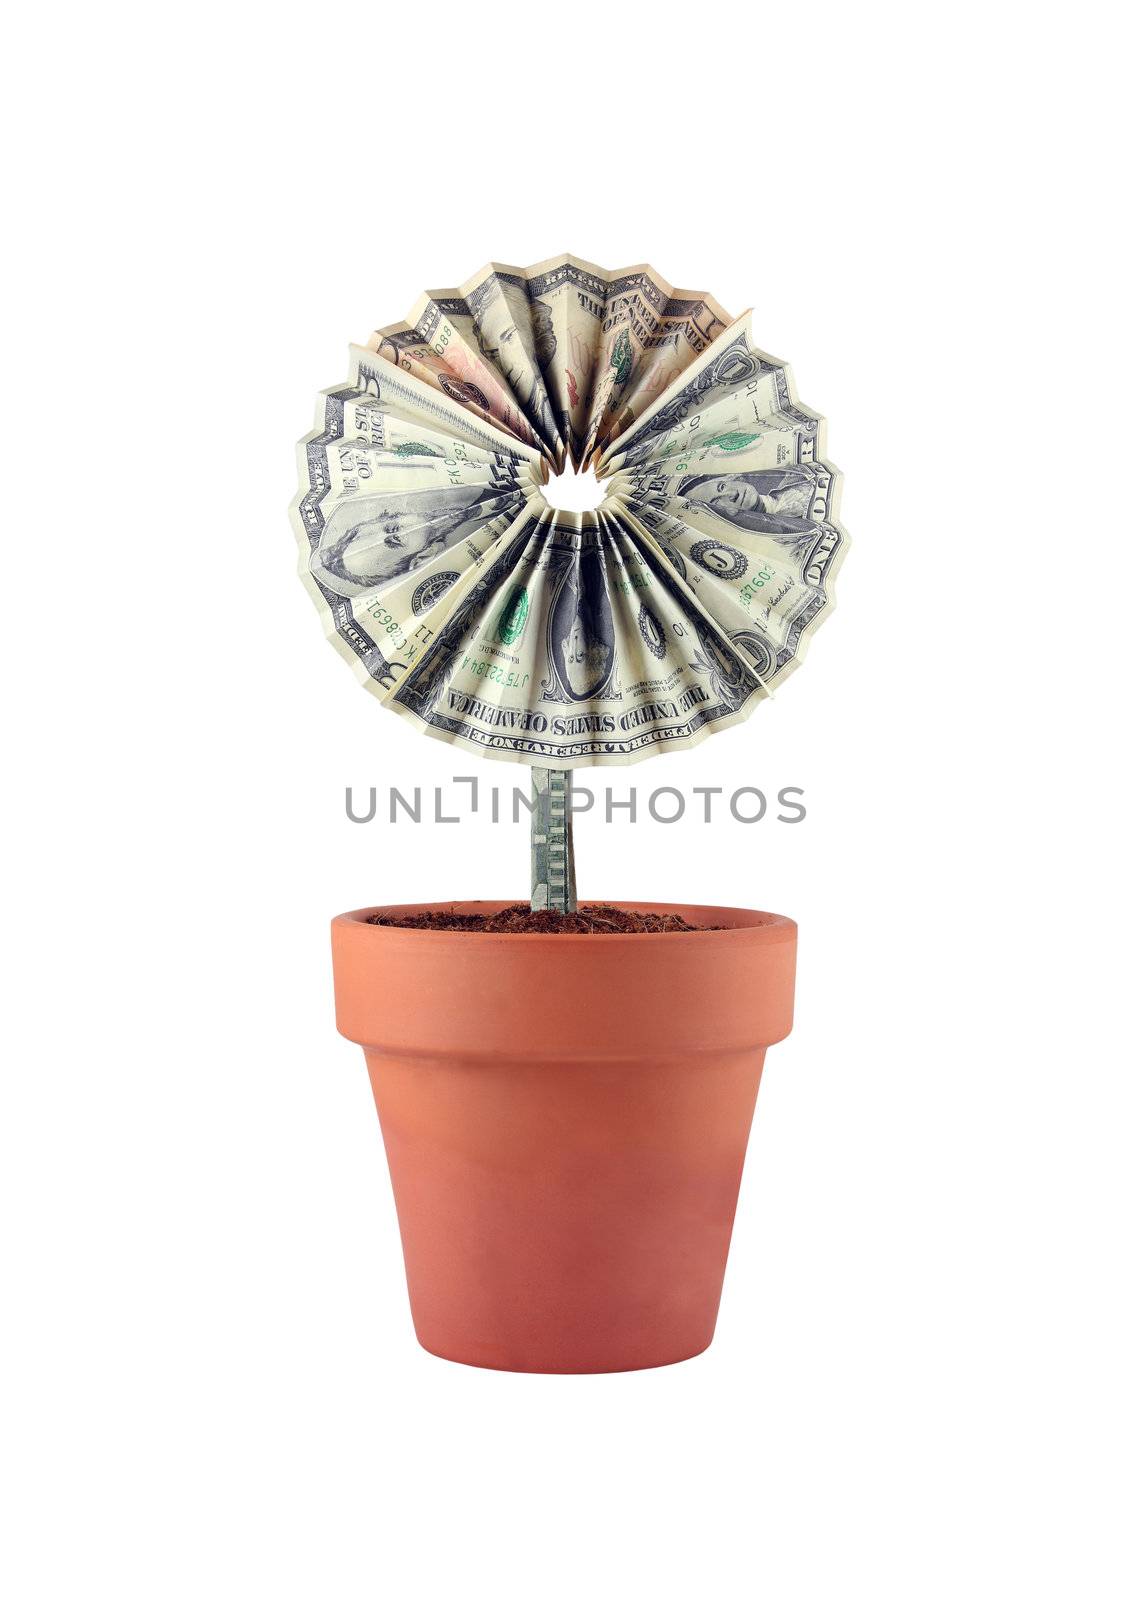 A flower made out of 1, 5, 10, and 20 dollar bills growing out of a flower pot.